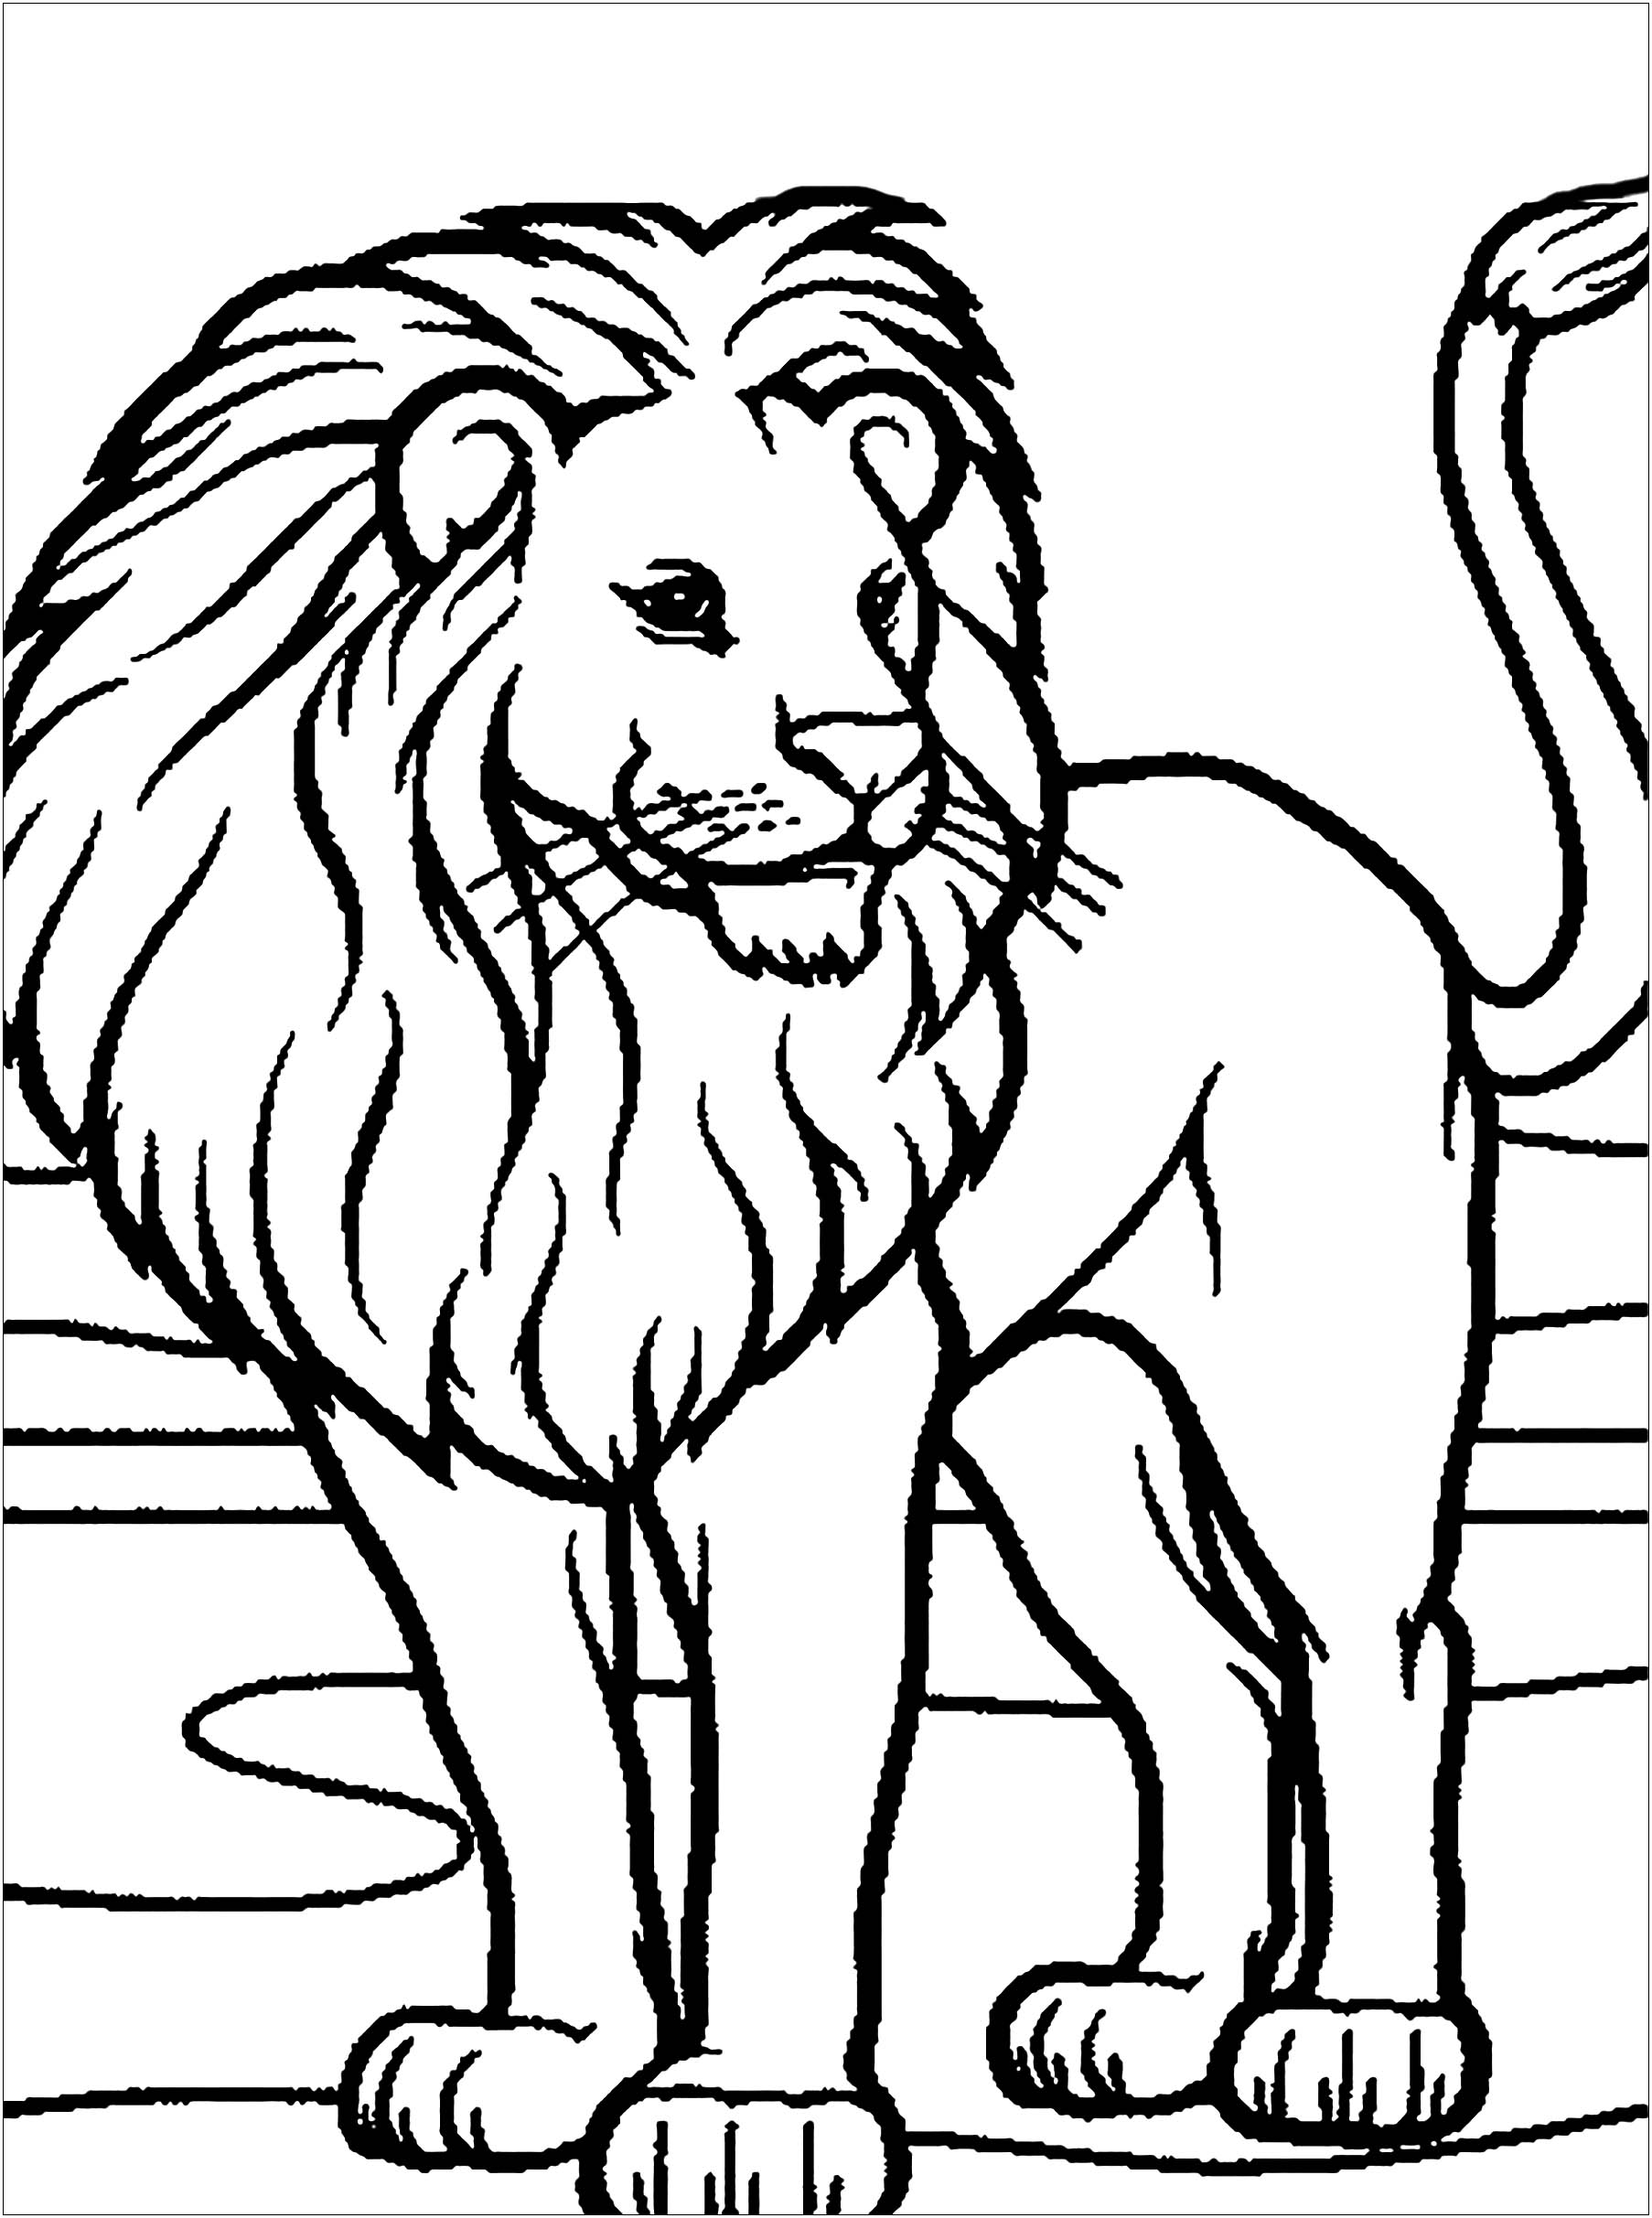 Download Lion free to color for children - Lion Kids Coloring Pages